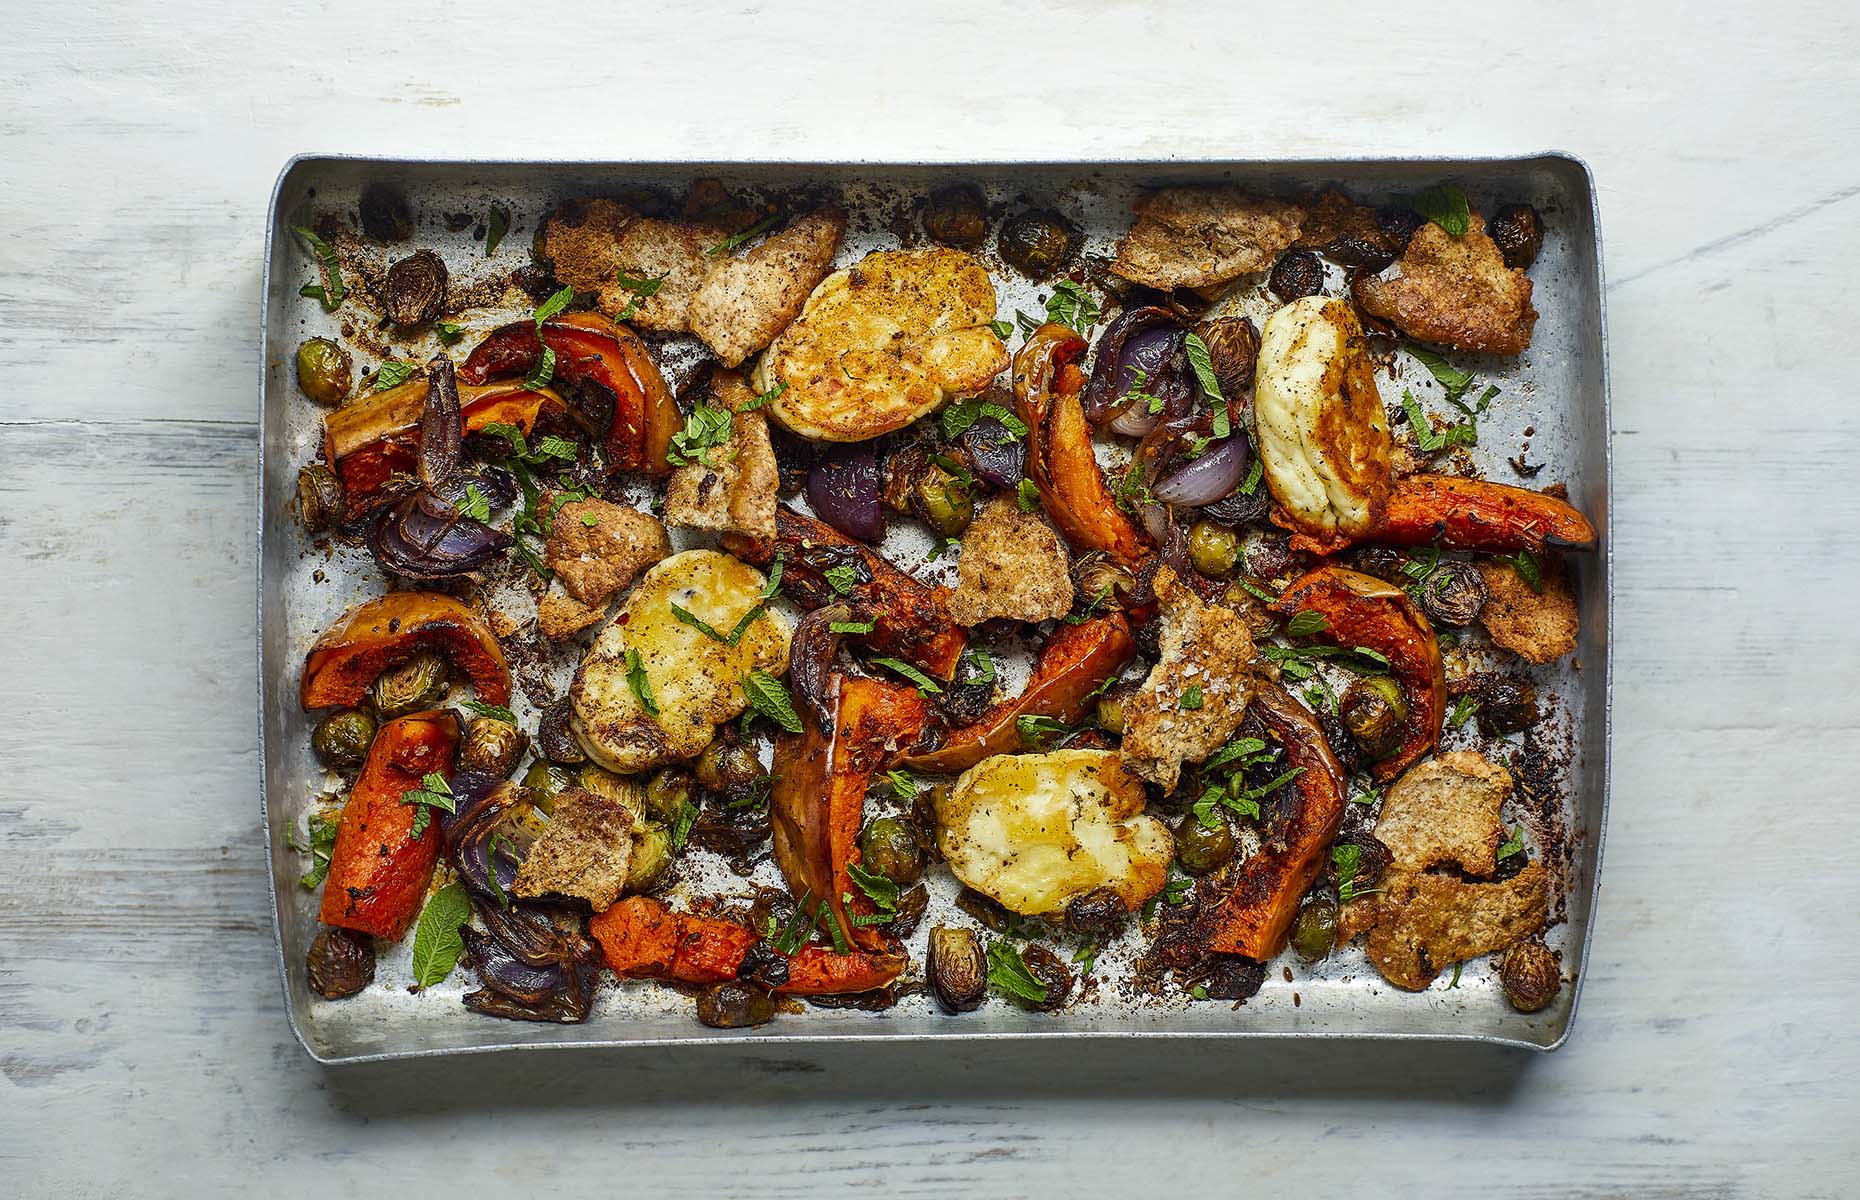 Roasted winter vegetable bake with halloumi